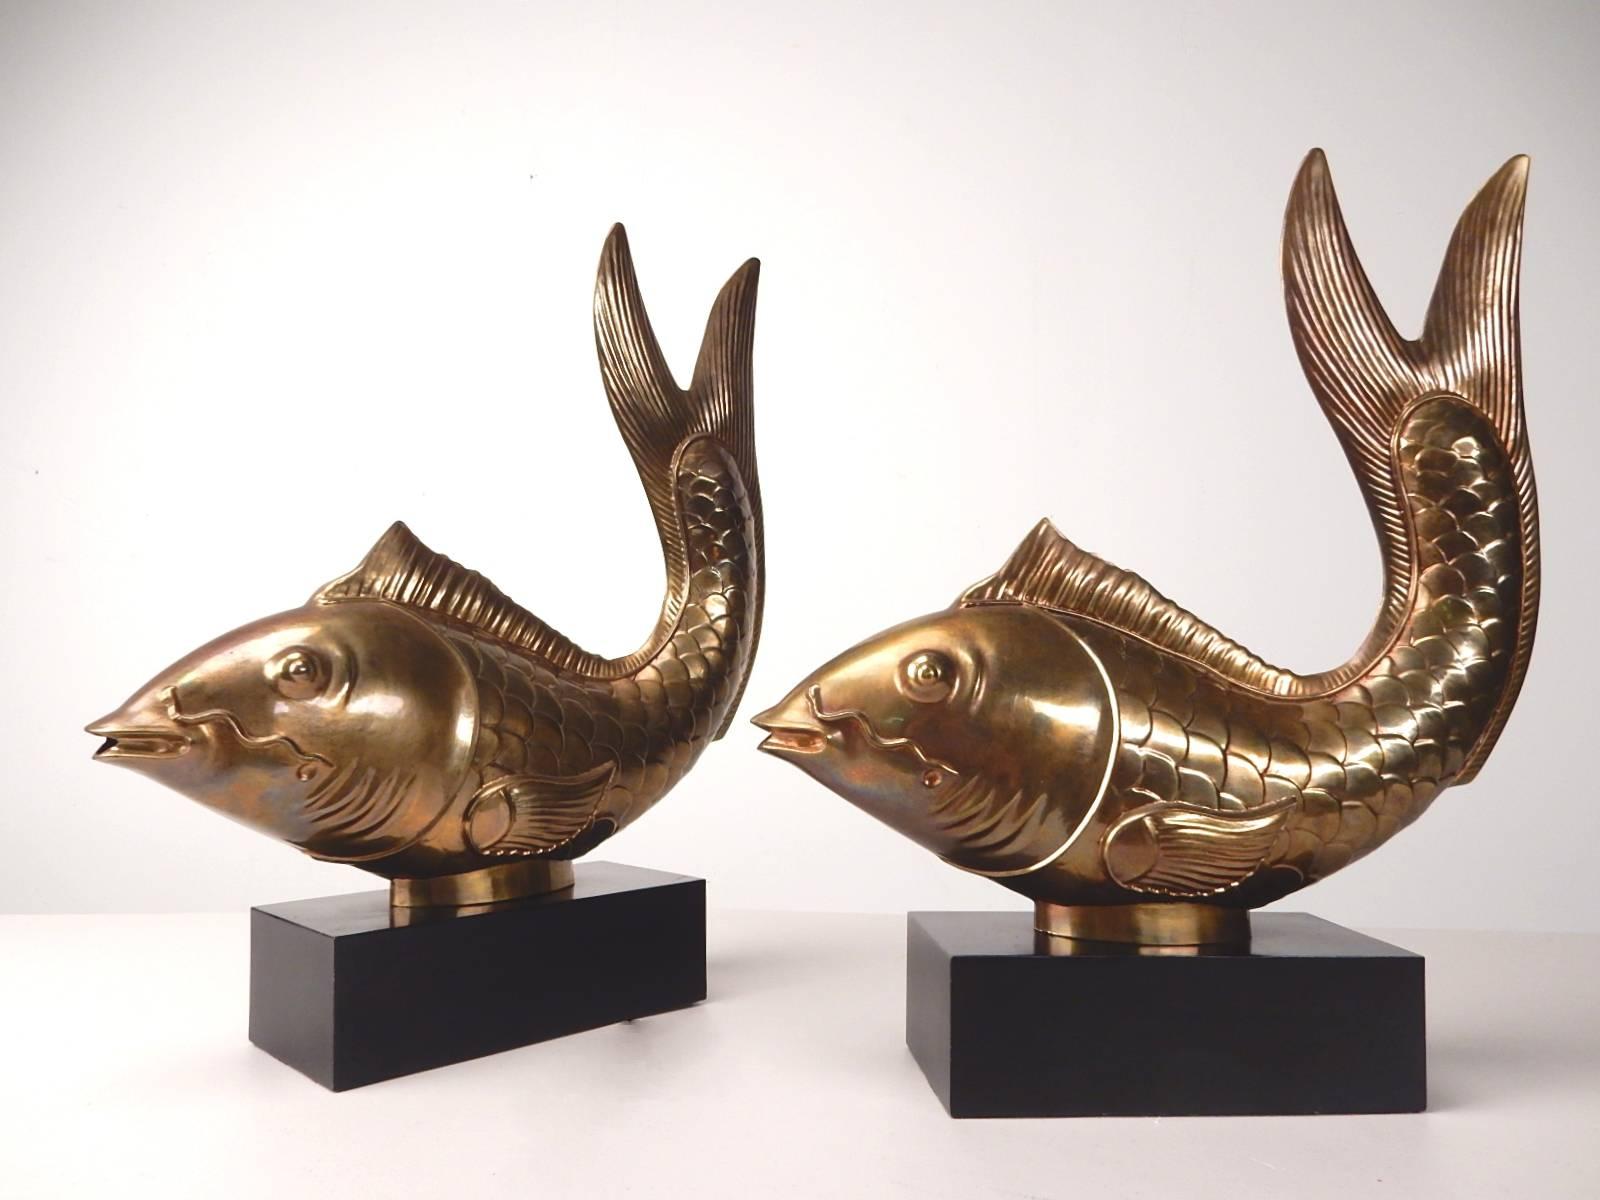 Extraordinary pair of huge solid brass Koi on lacquered wood plinth by the Chapman Lamp CO. dated 1977.
Fabulous aged patina on brass. Mint condition.